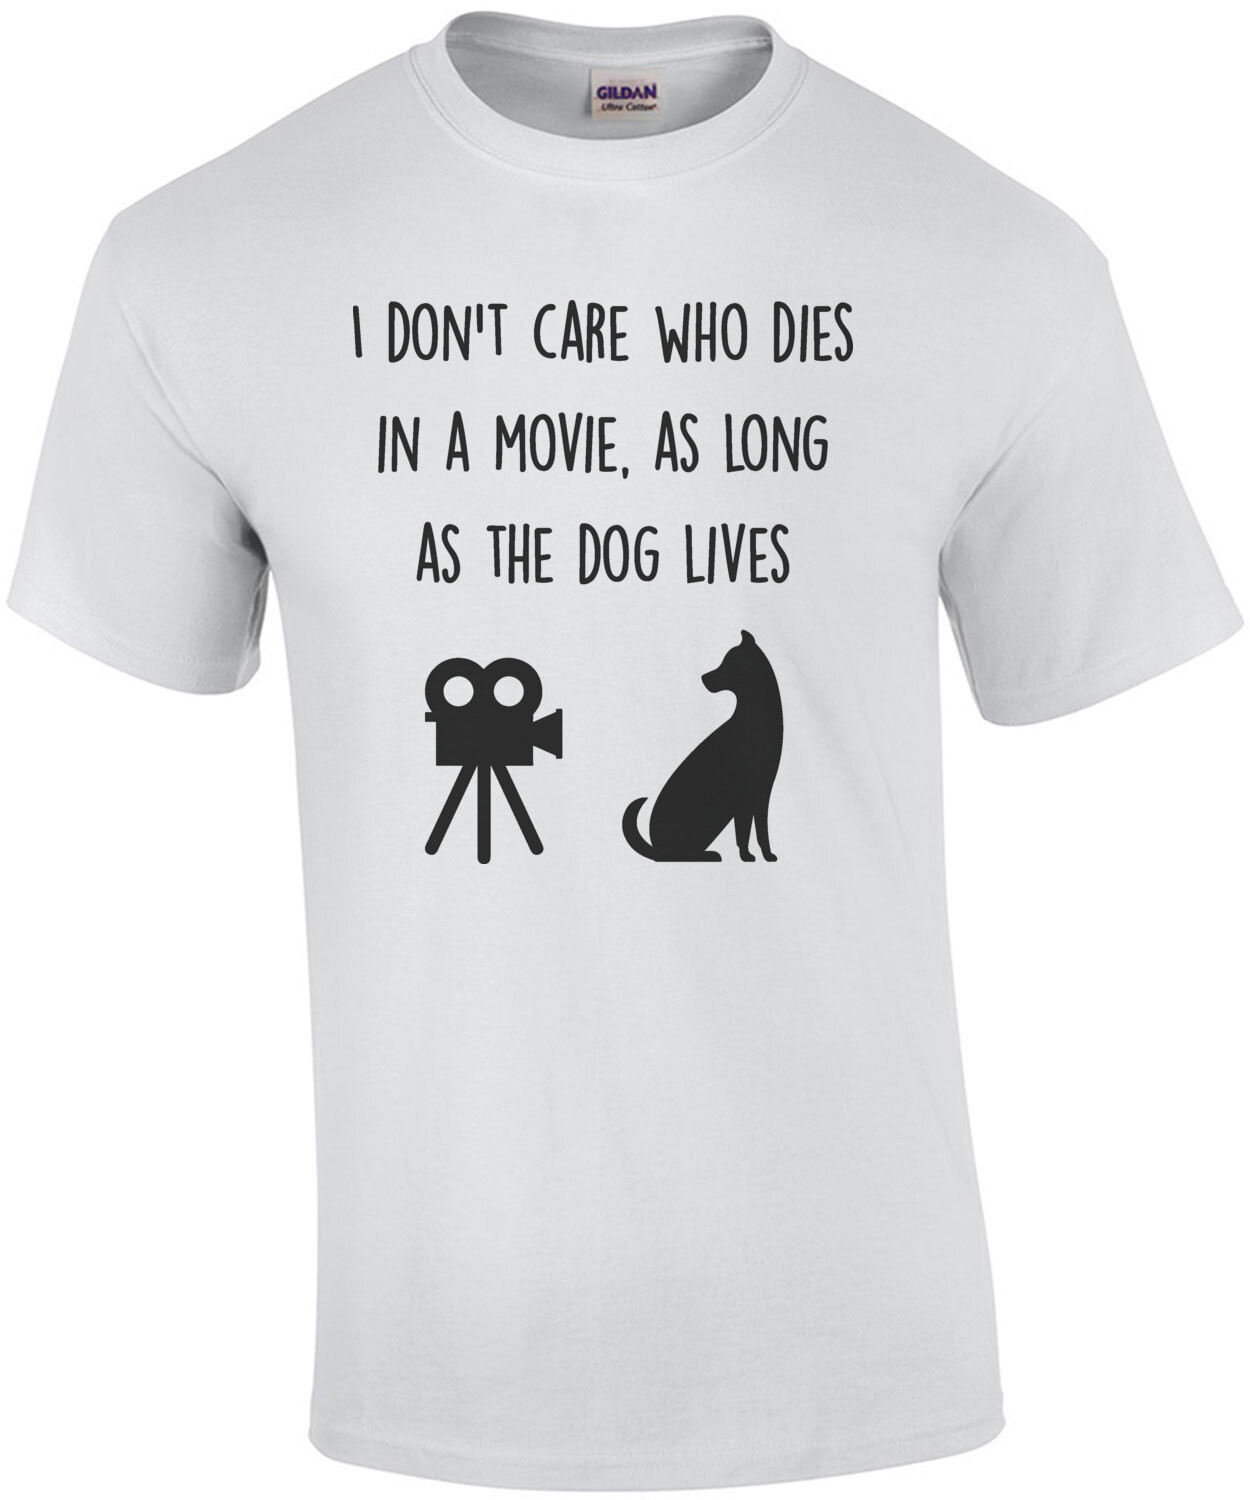 I don't care who dies in a movie, as long as the dog lives - funy t-shirt